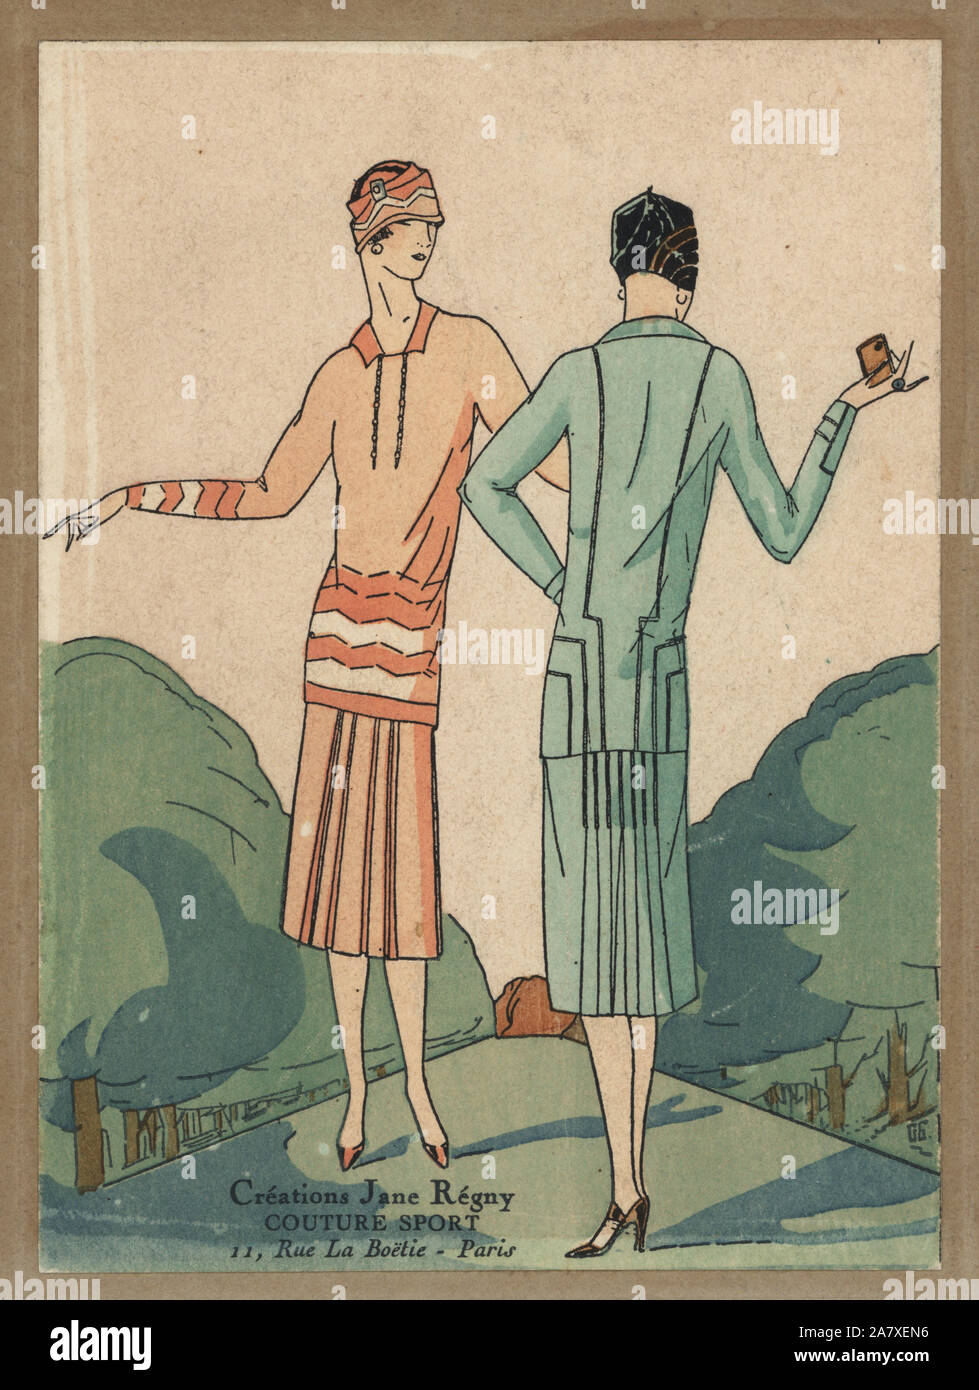 Women in sports dresses with pleated skirts and decorated tops. Handcolored pochoir (stencil) lithograph from the French luxury fashion magazine Art, Gout, Beaute, 1926. Stock Photo